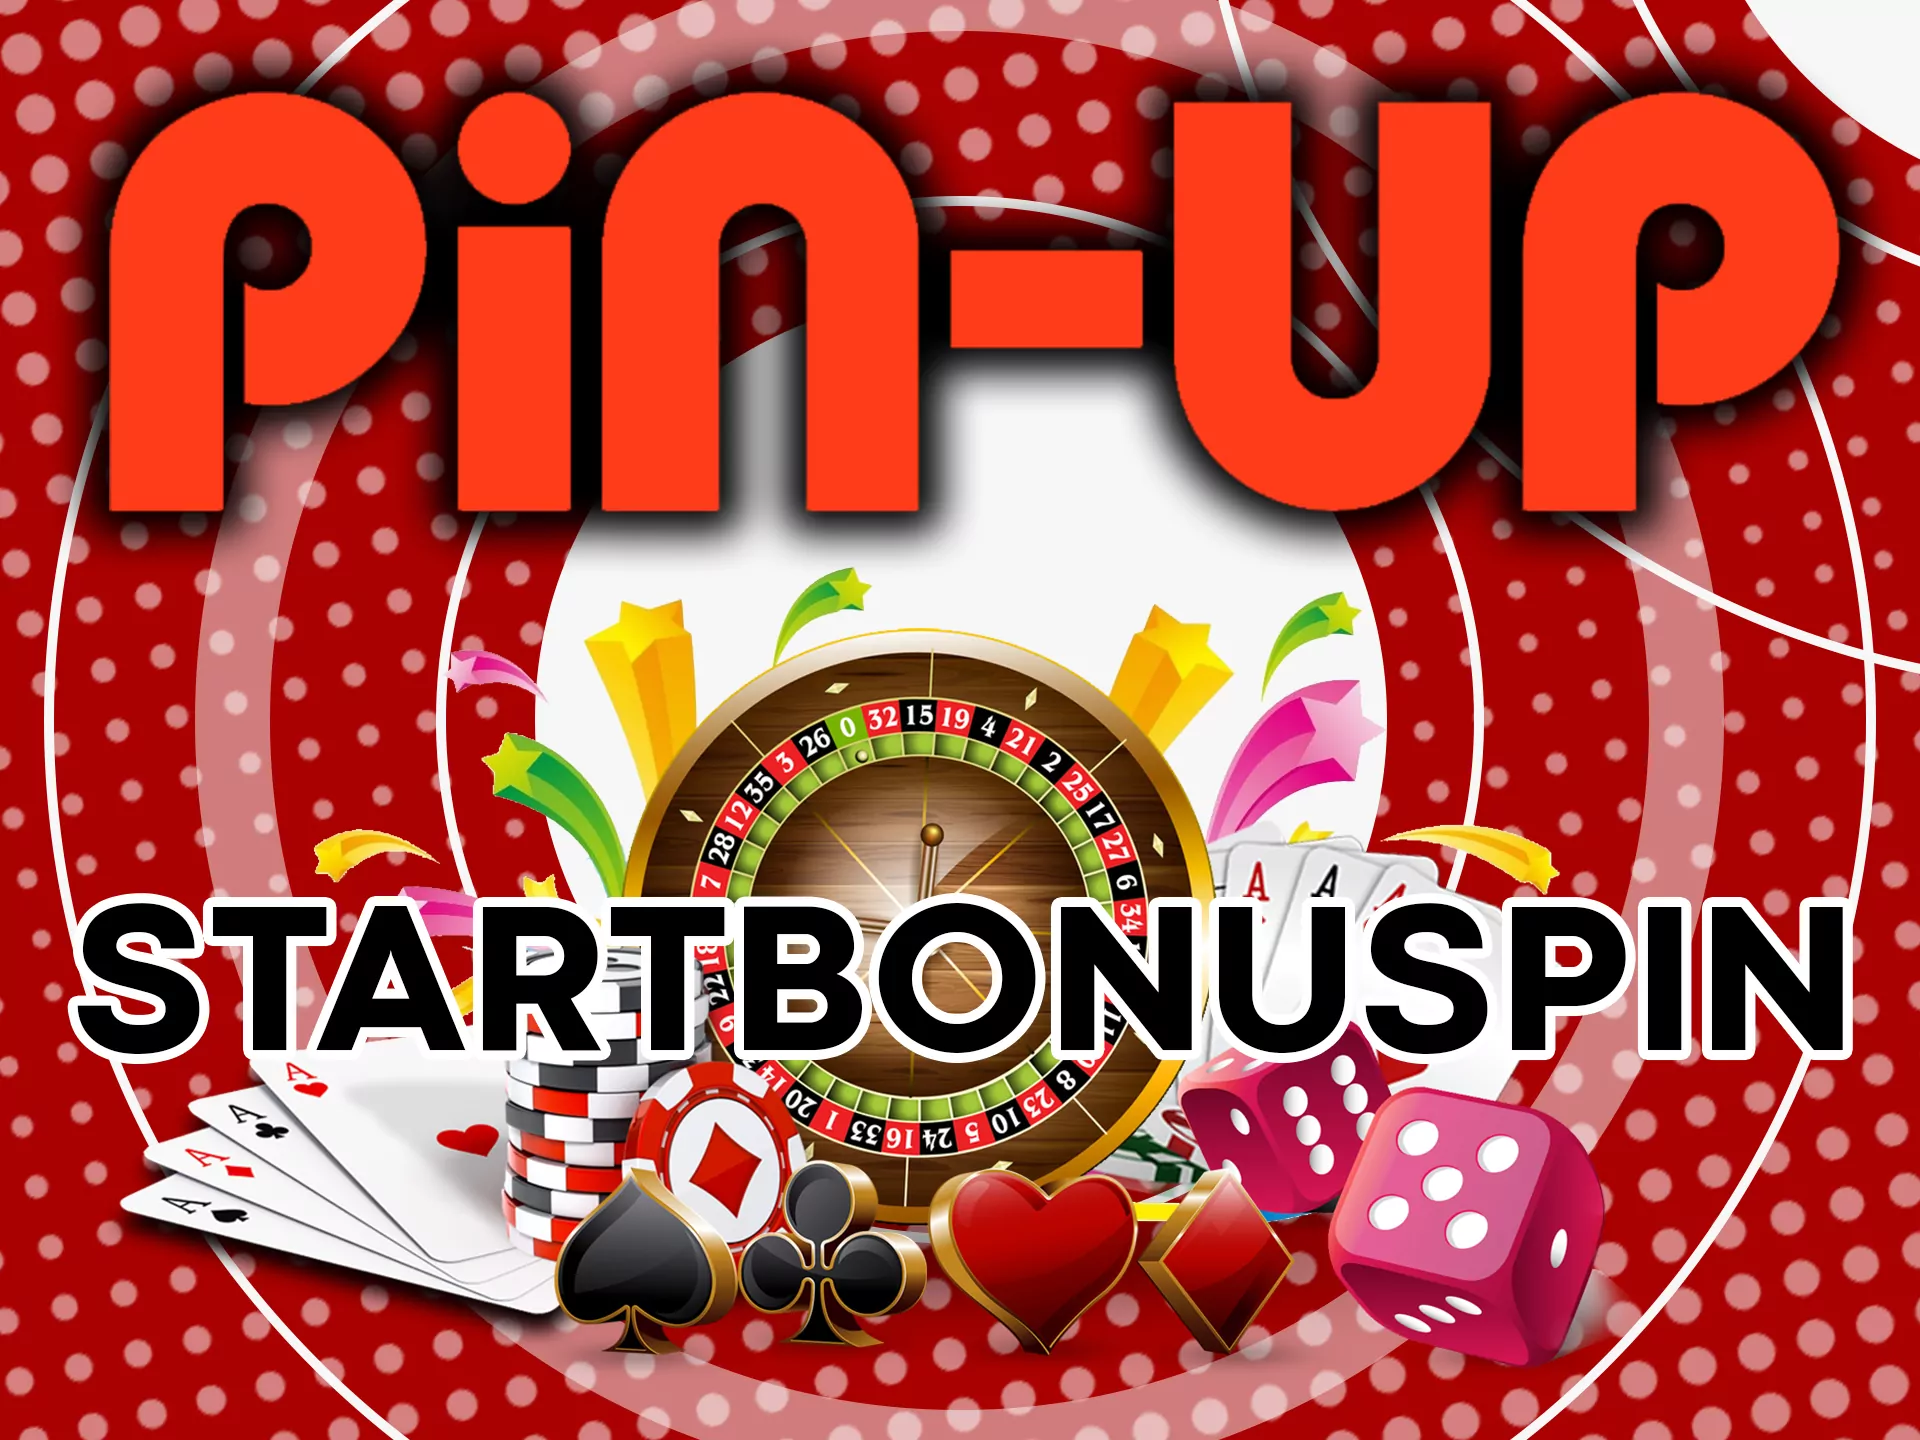 Use the promo-code during registration at pin-up.